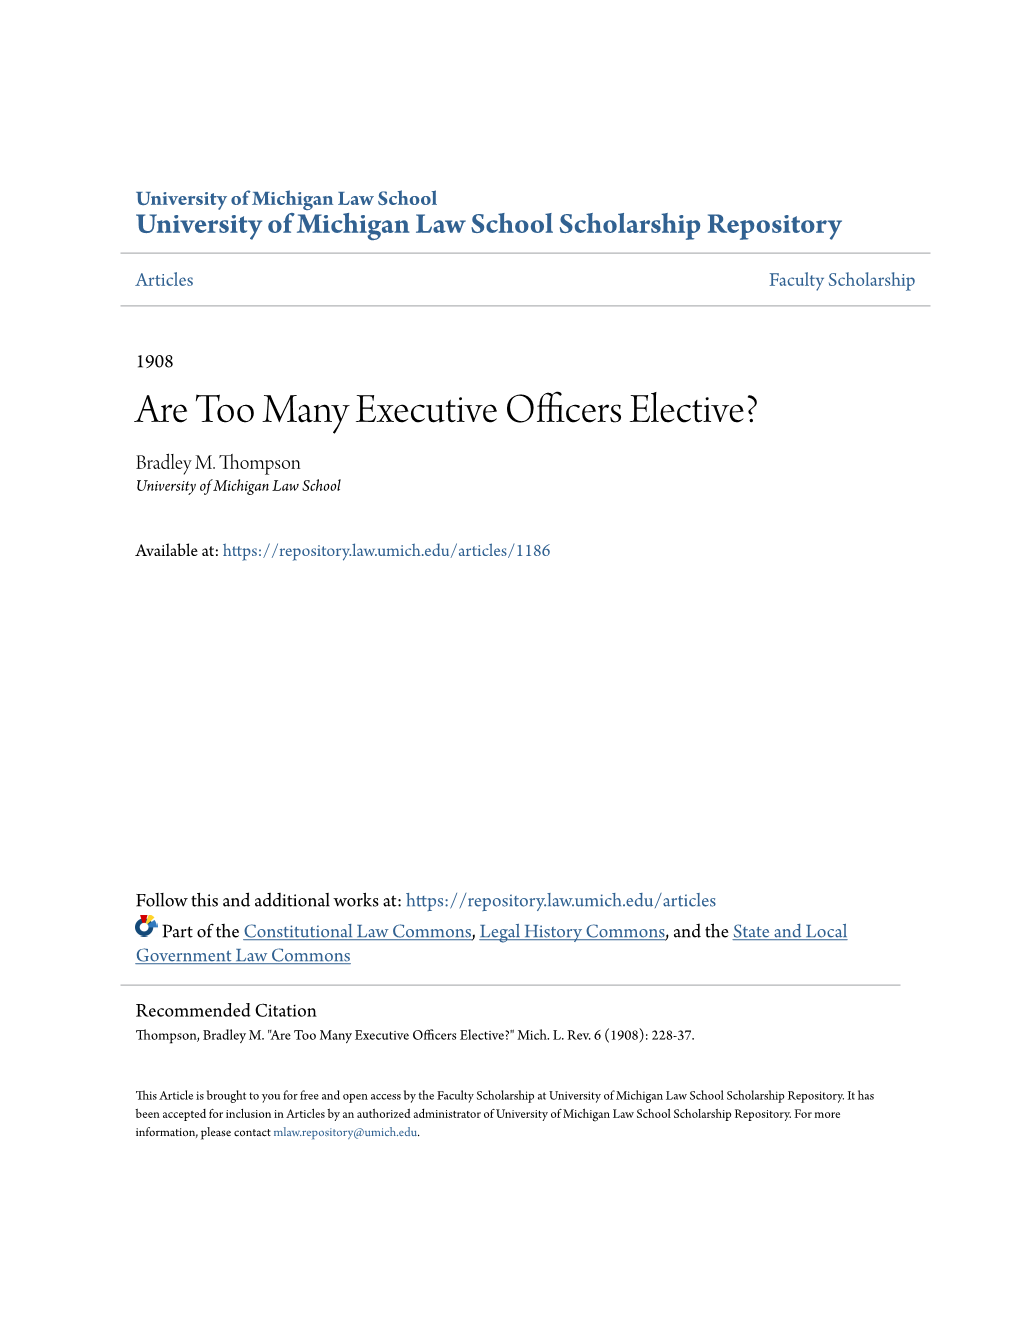 Are Too Many Executive Officers Elective? Bradley M